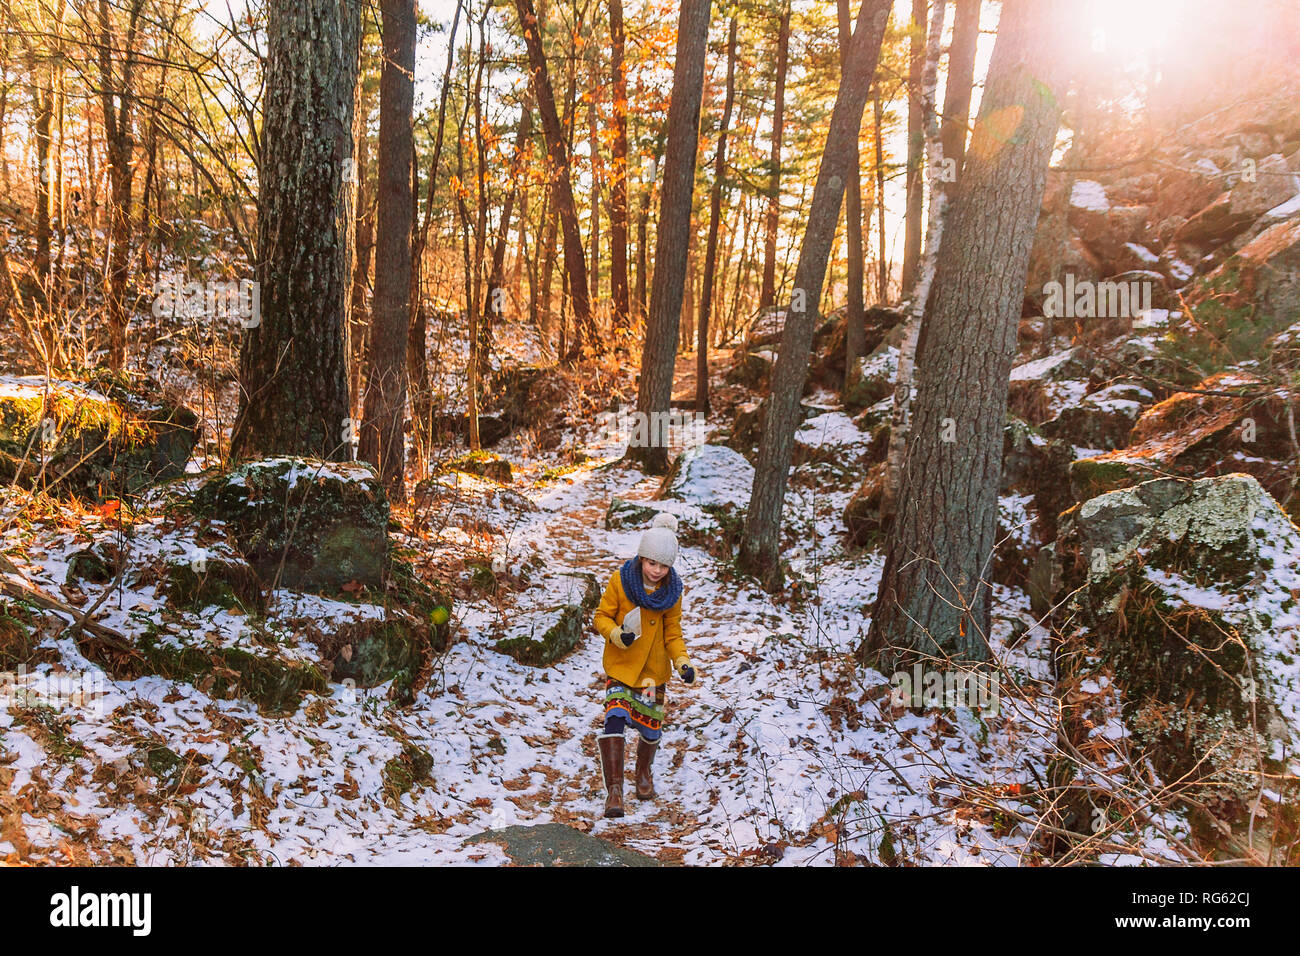 Girl hiking through forest holding a piece of frozen ice, United States Stock Photo